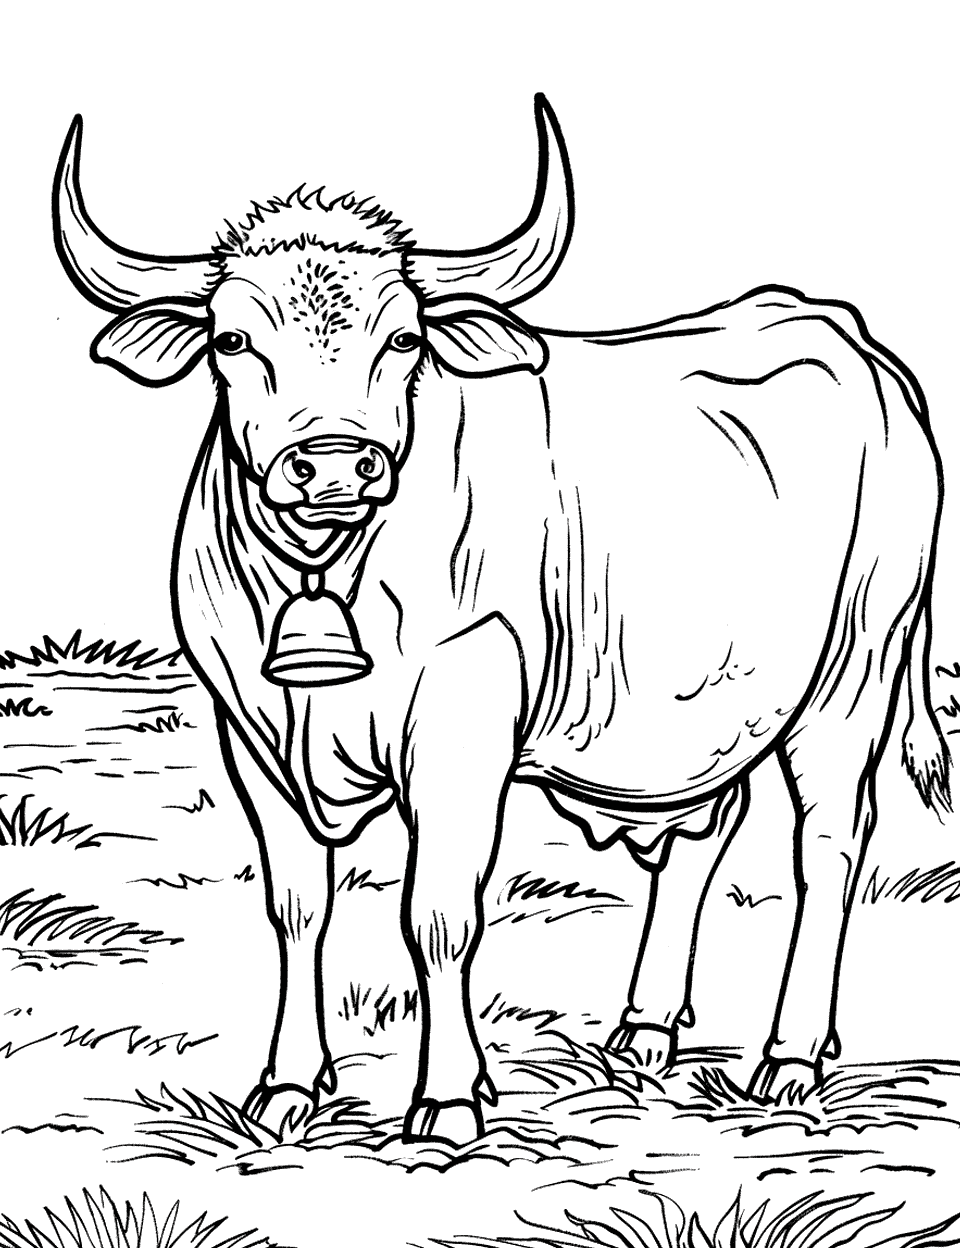 Bull with a Bell Around Its Neck Farm Animal Coloring Page - A proud bull with a large bell hanging from its neck, standing in a pasture.